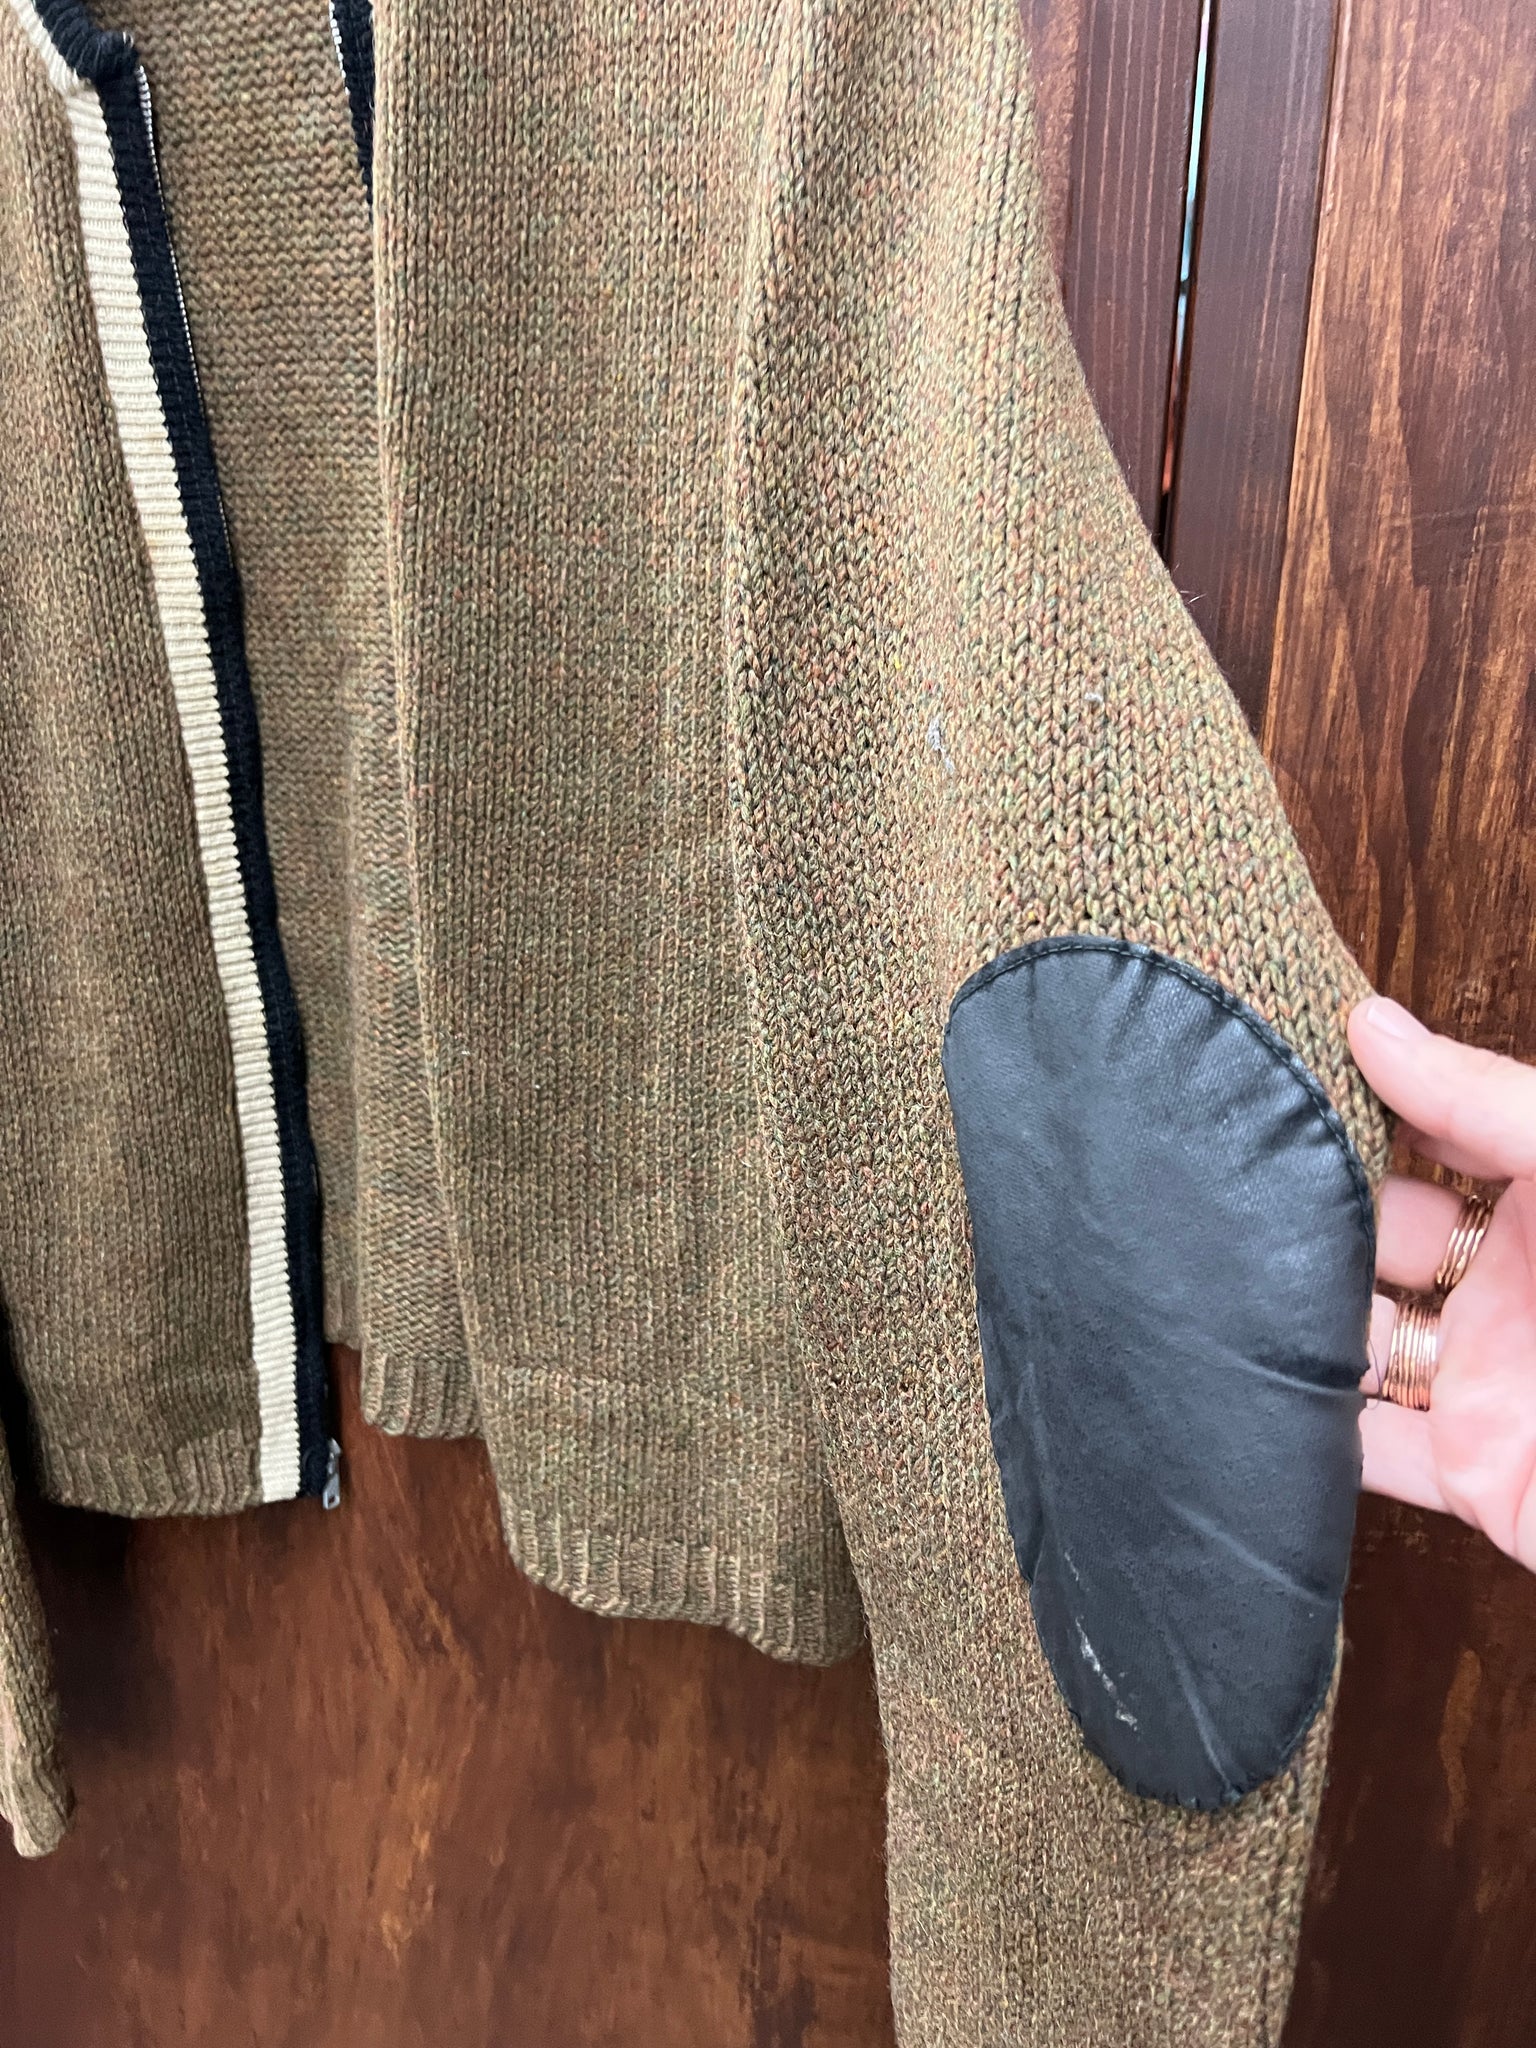 1950s MENS SWEATER-Jersild olive green wool zip front elbow patches (A –  Kiki stash Collection